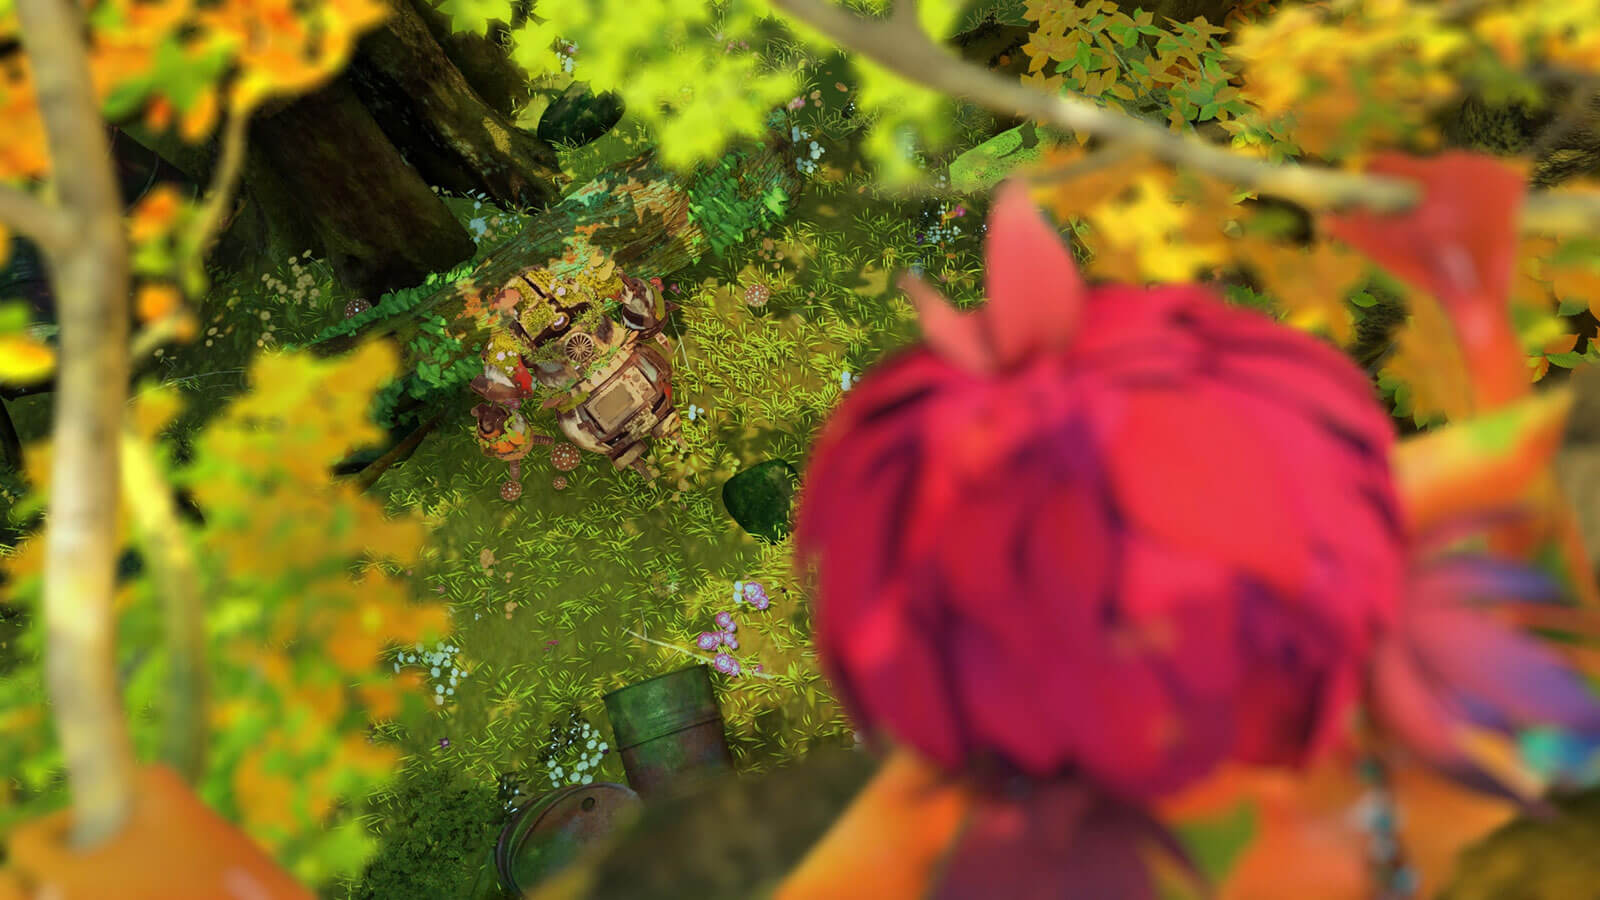 Top-down view of a girl with pink hair looking down at a robot from a tree